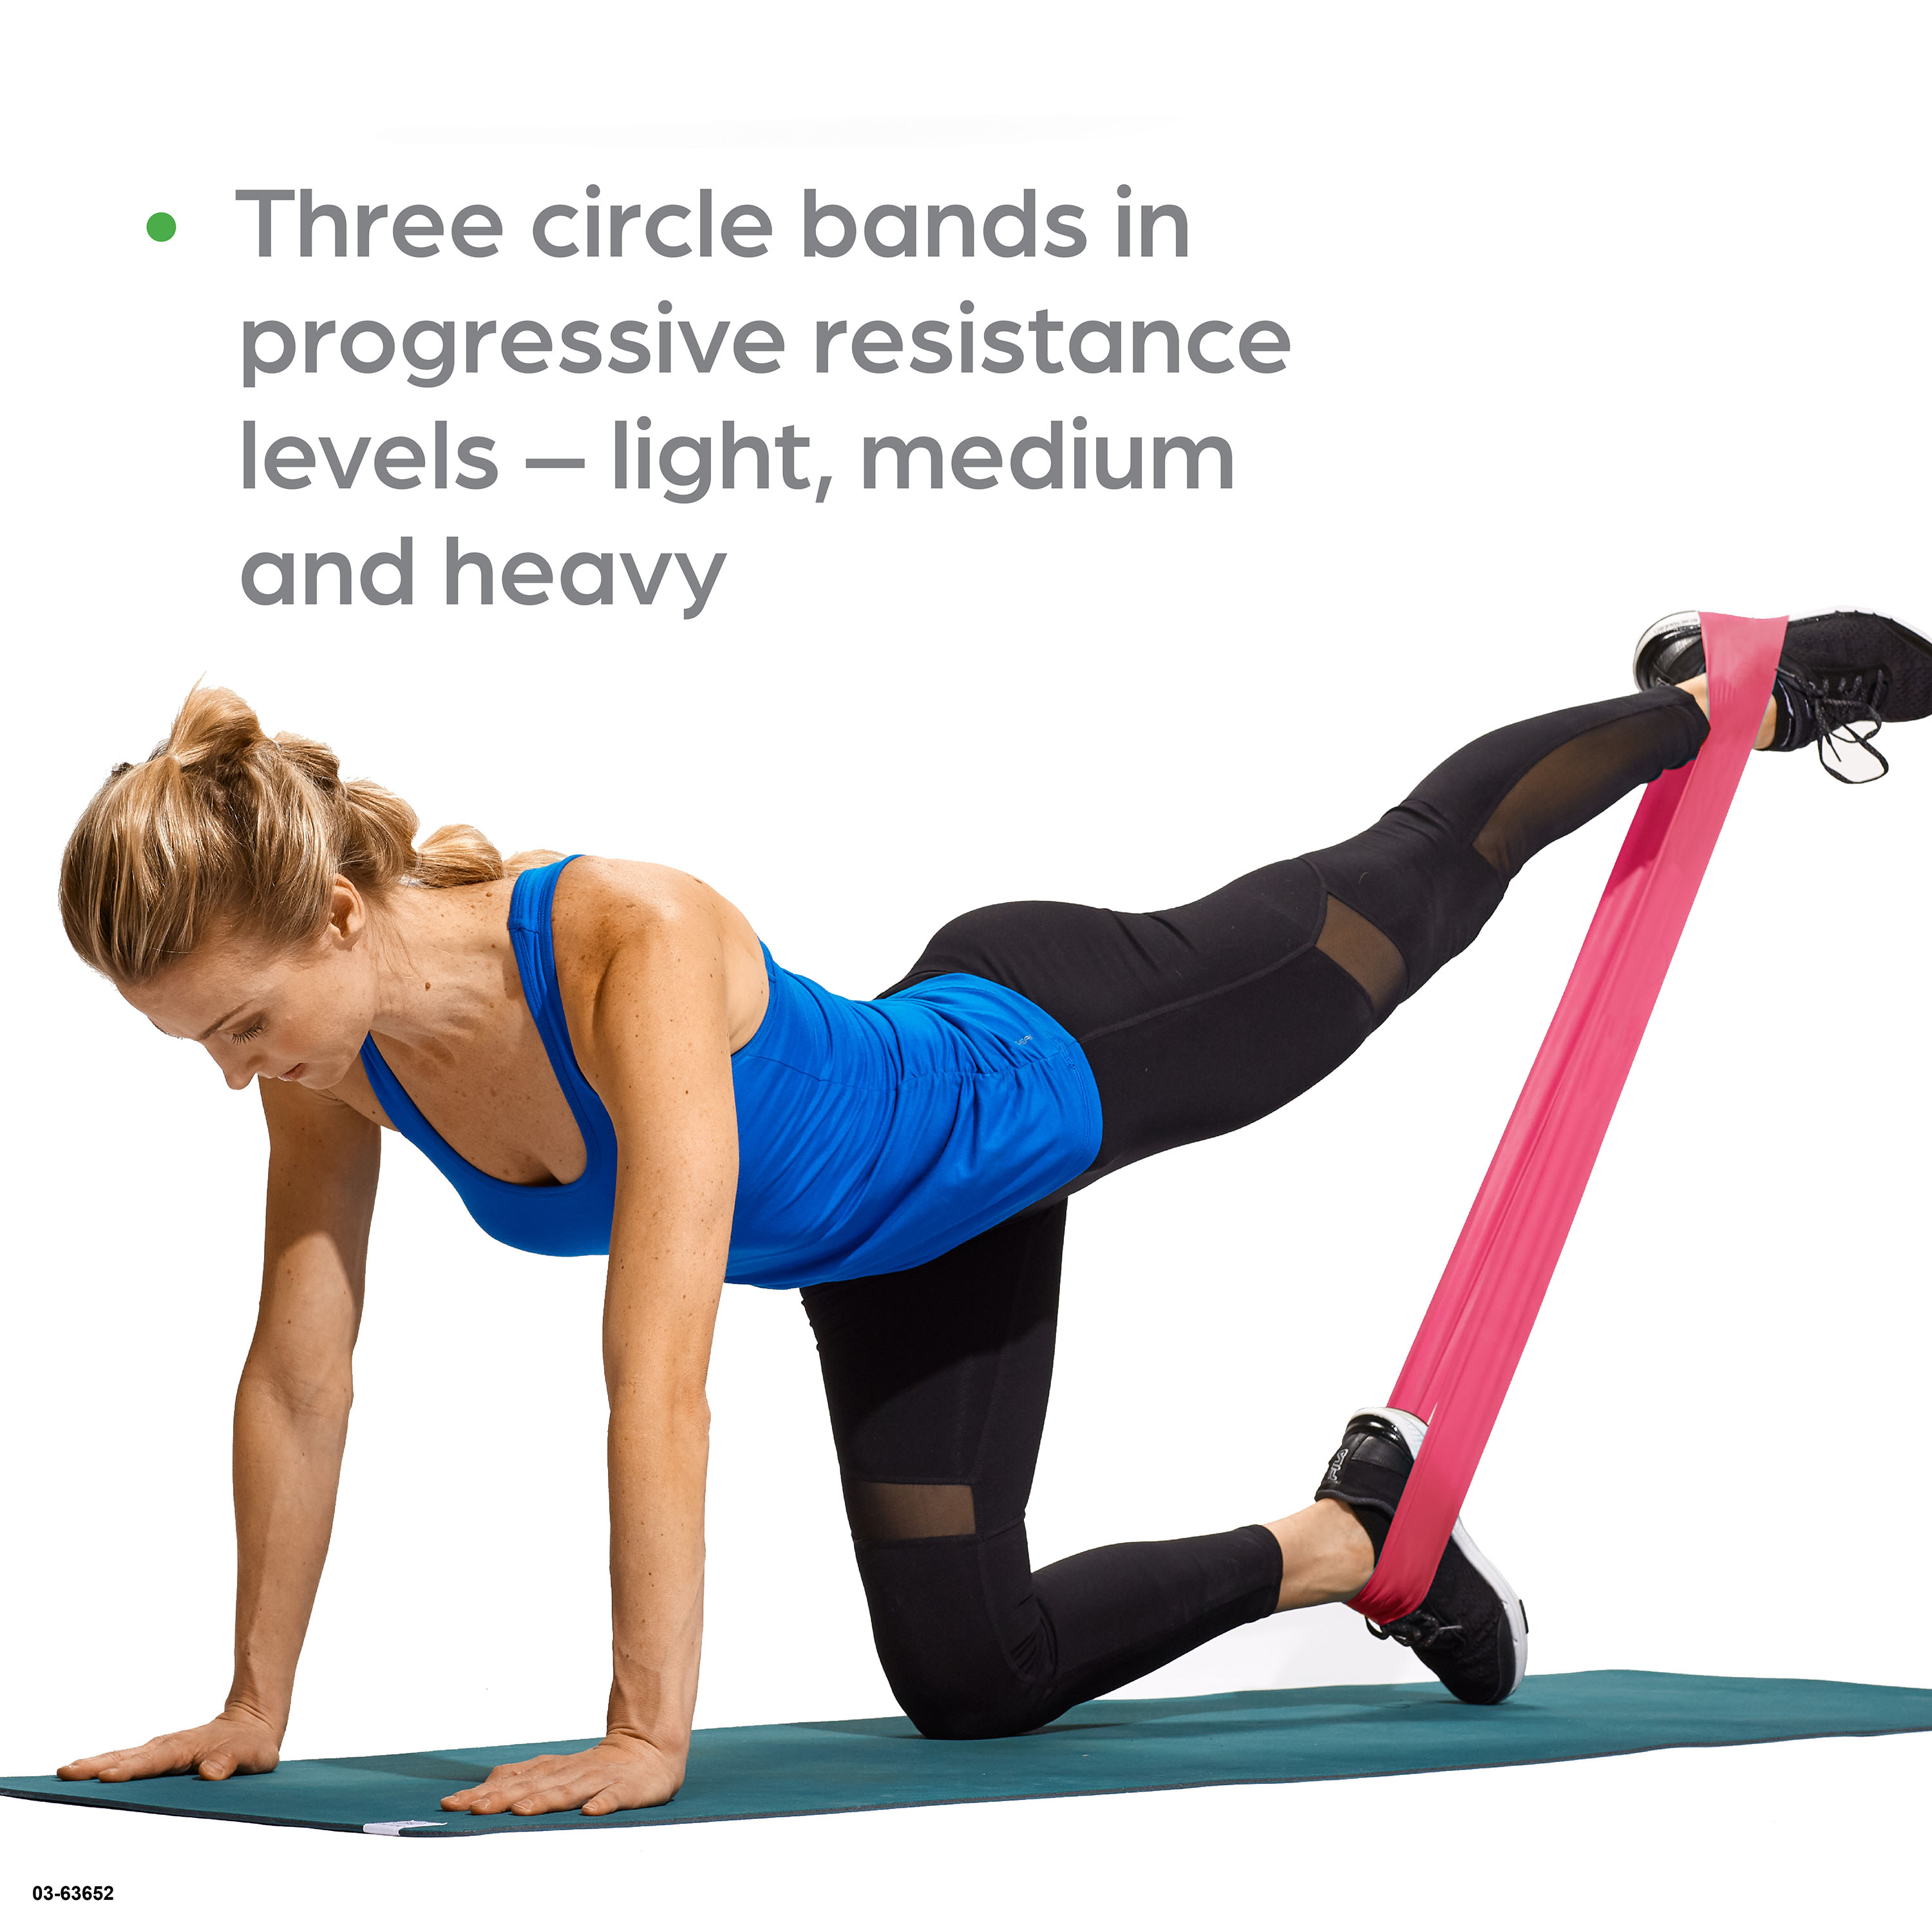 Gaiam Loop Band Kit, Includes Light, Medium and Heavy Resistance Levels, 3 Pk - image 4 of 6